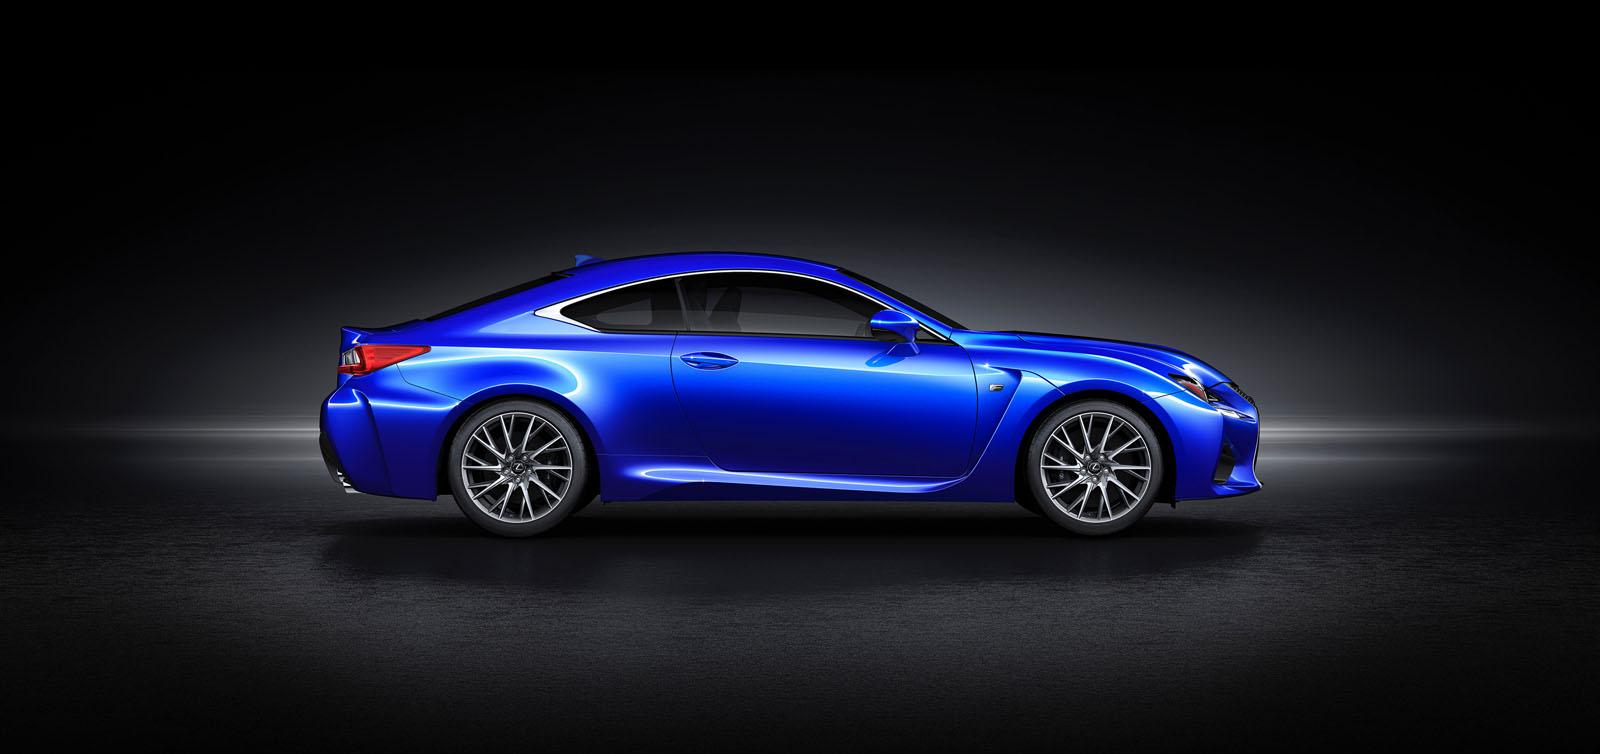 Lexus Cars News Rc F Coupe Officially Revealed